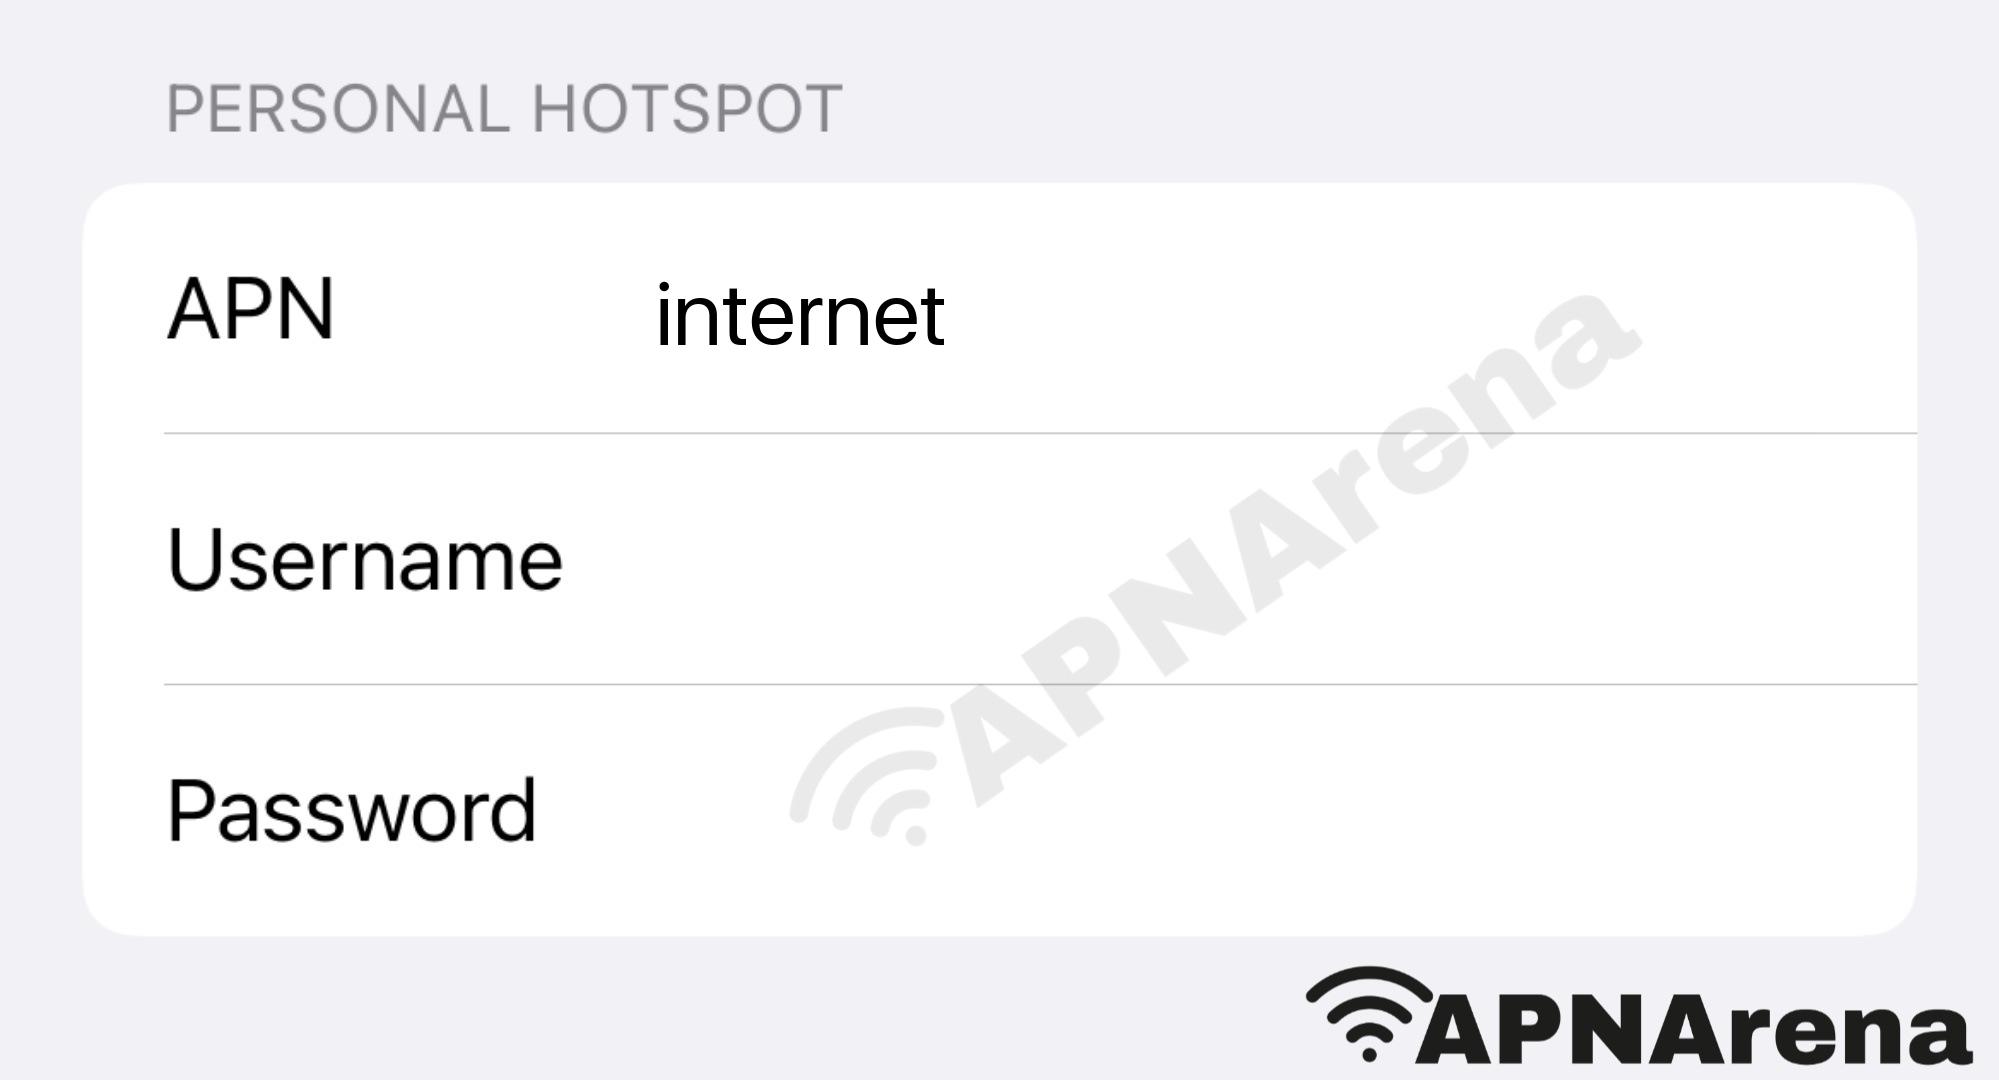 RED Personal Hotspot Settings for iPhone